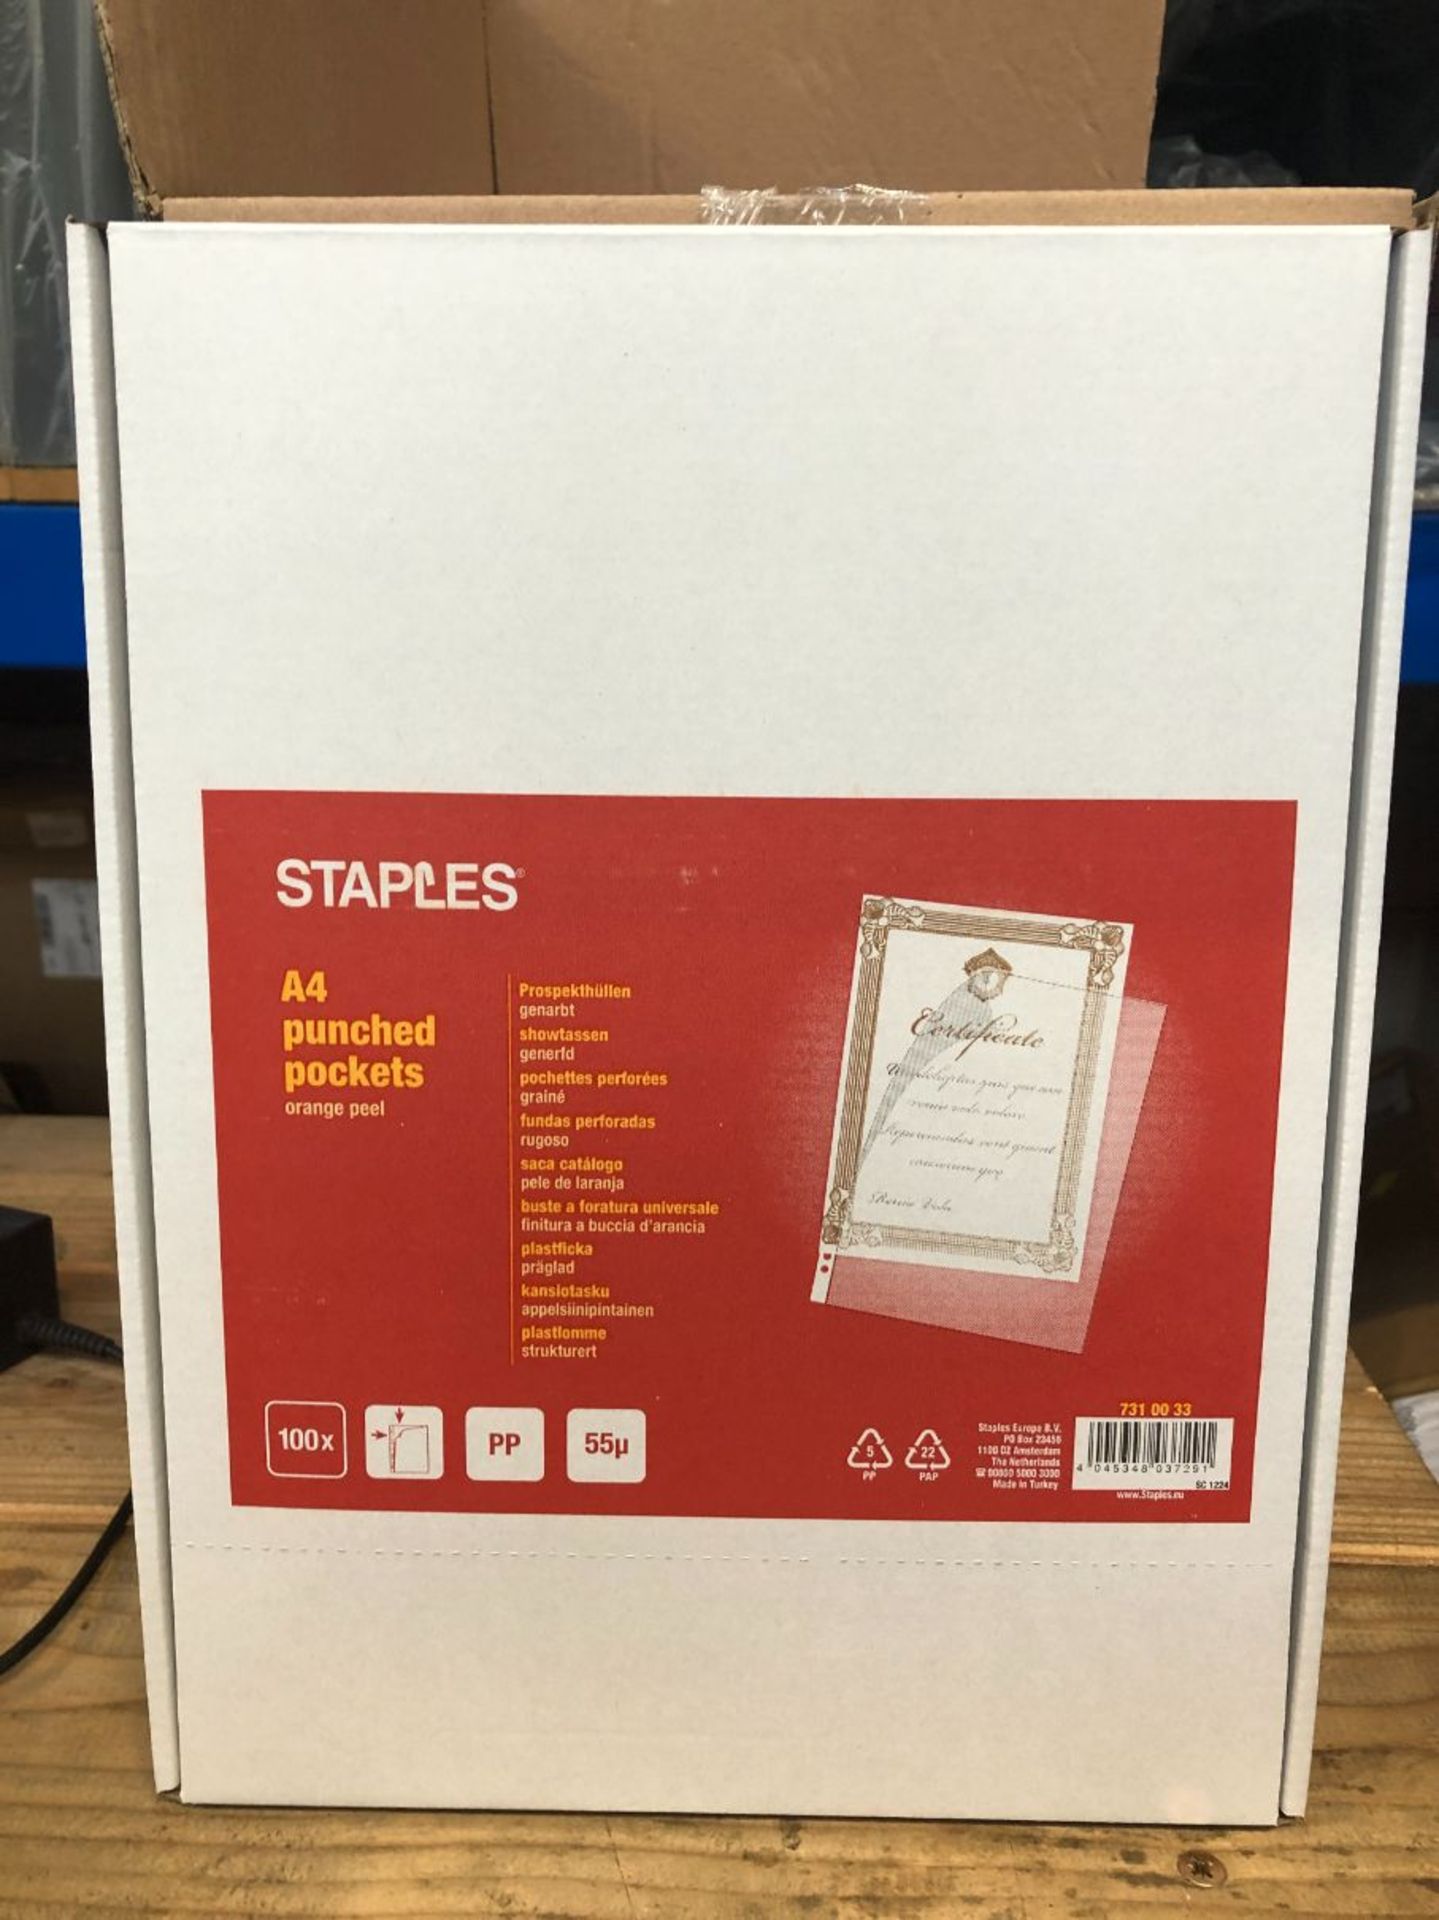 1 X BOX CONTAINING 10 PACKS OF STAPLES A4 PUNCHES POCKETS / 100 PER PACK